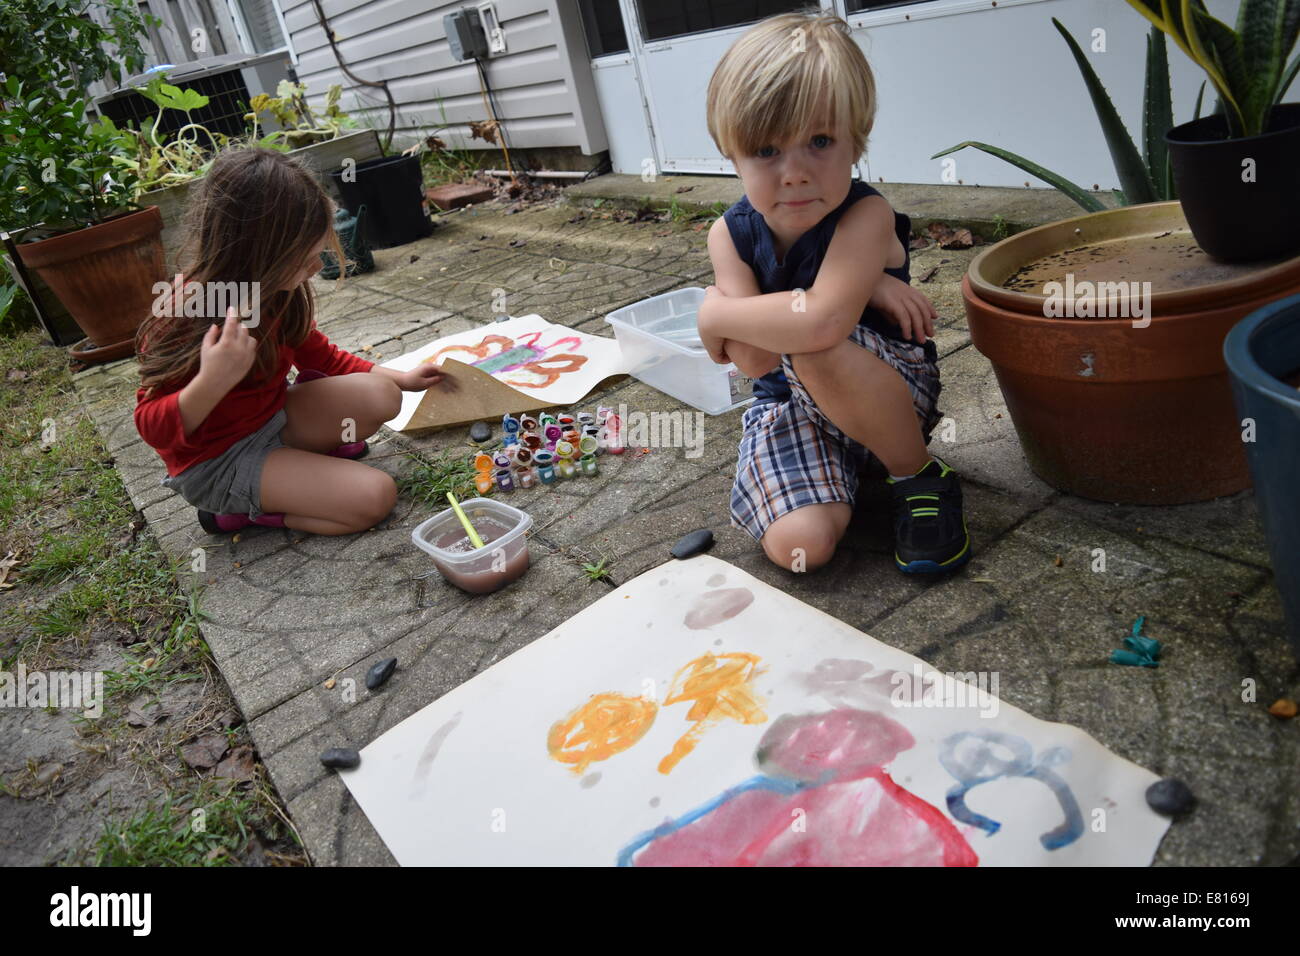 Boy and girl making art in backyard Banque D'Images